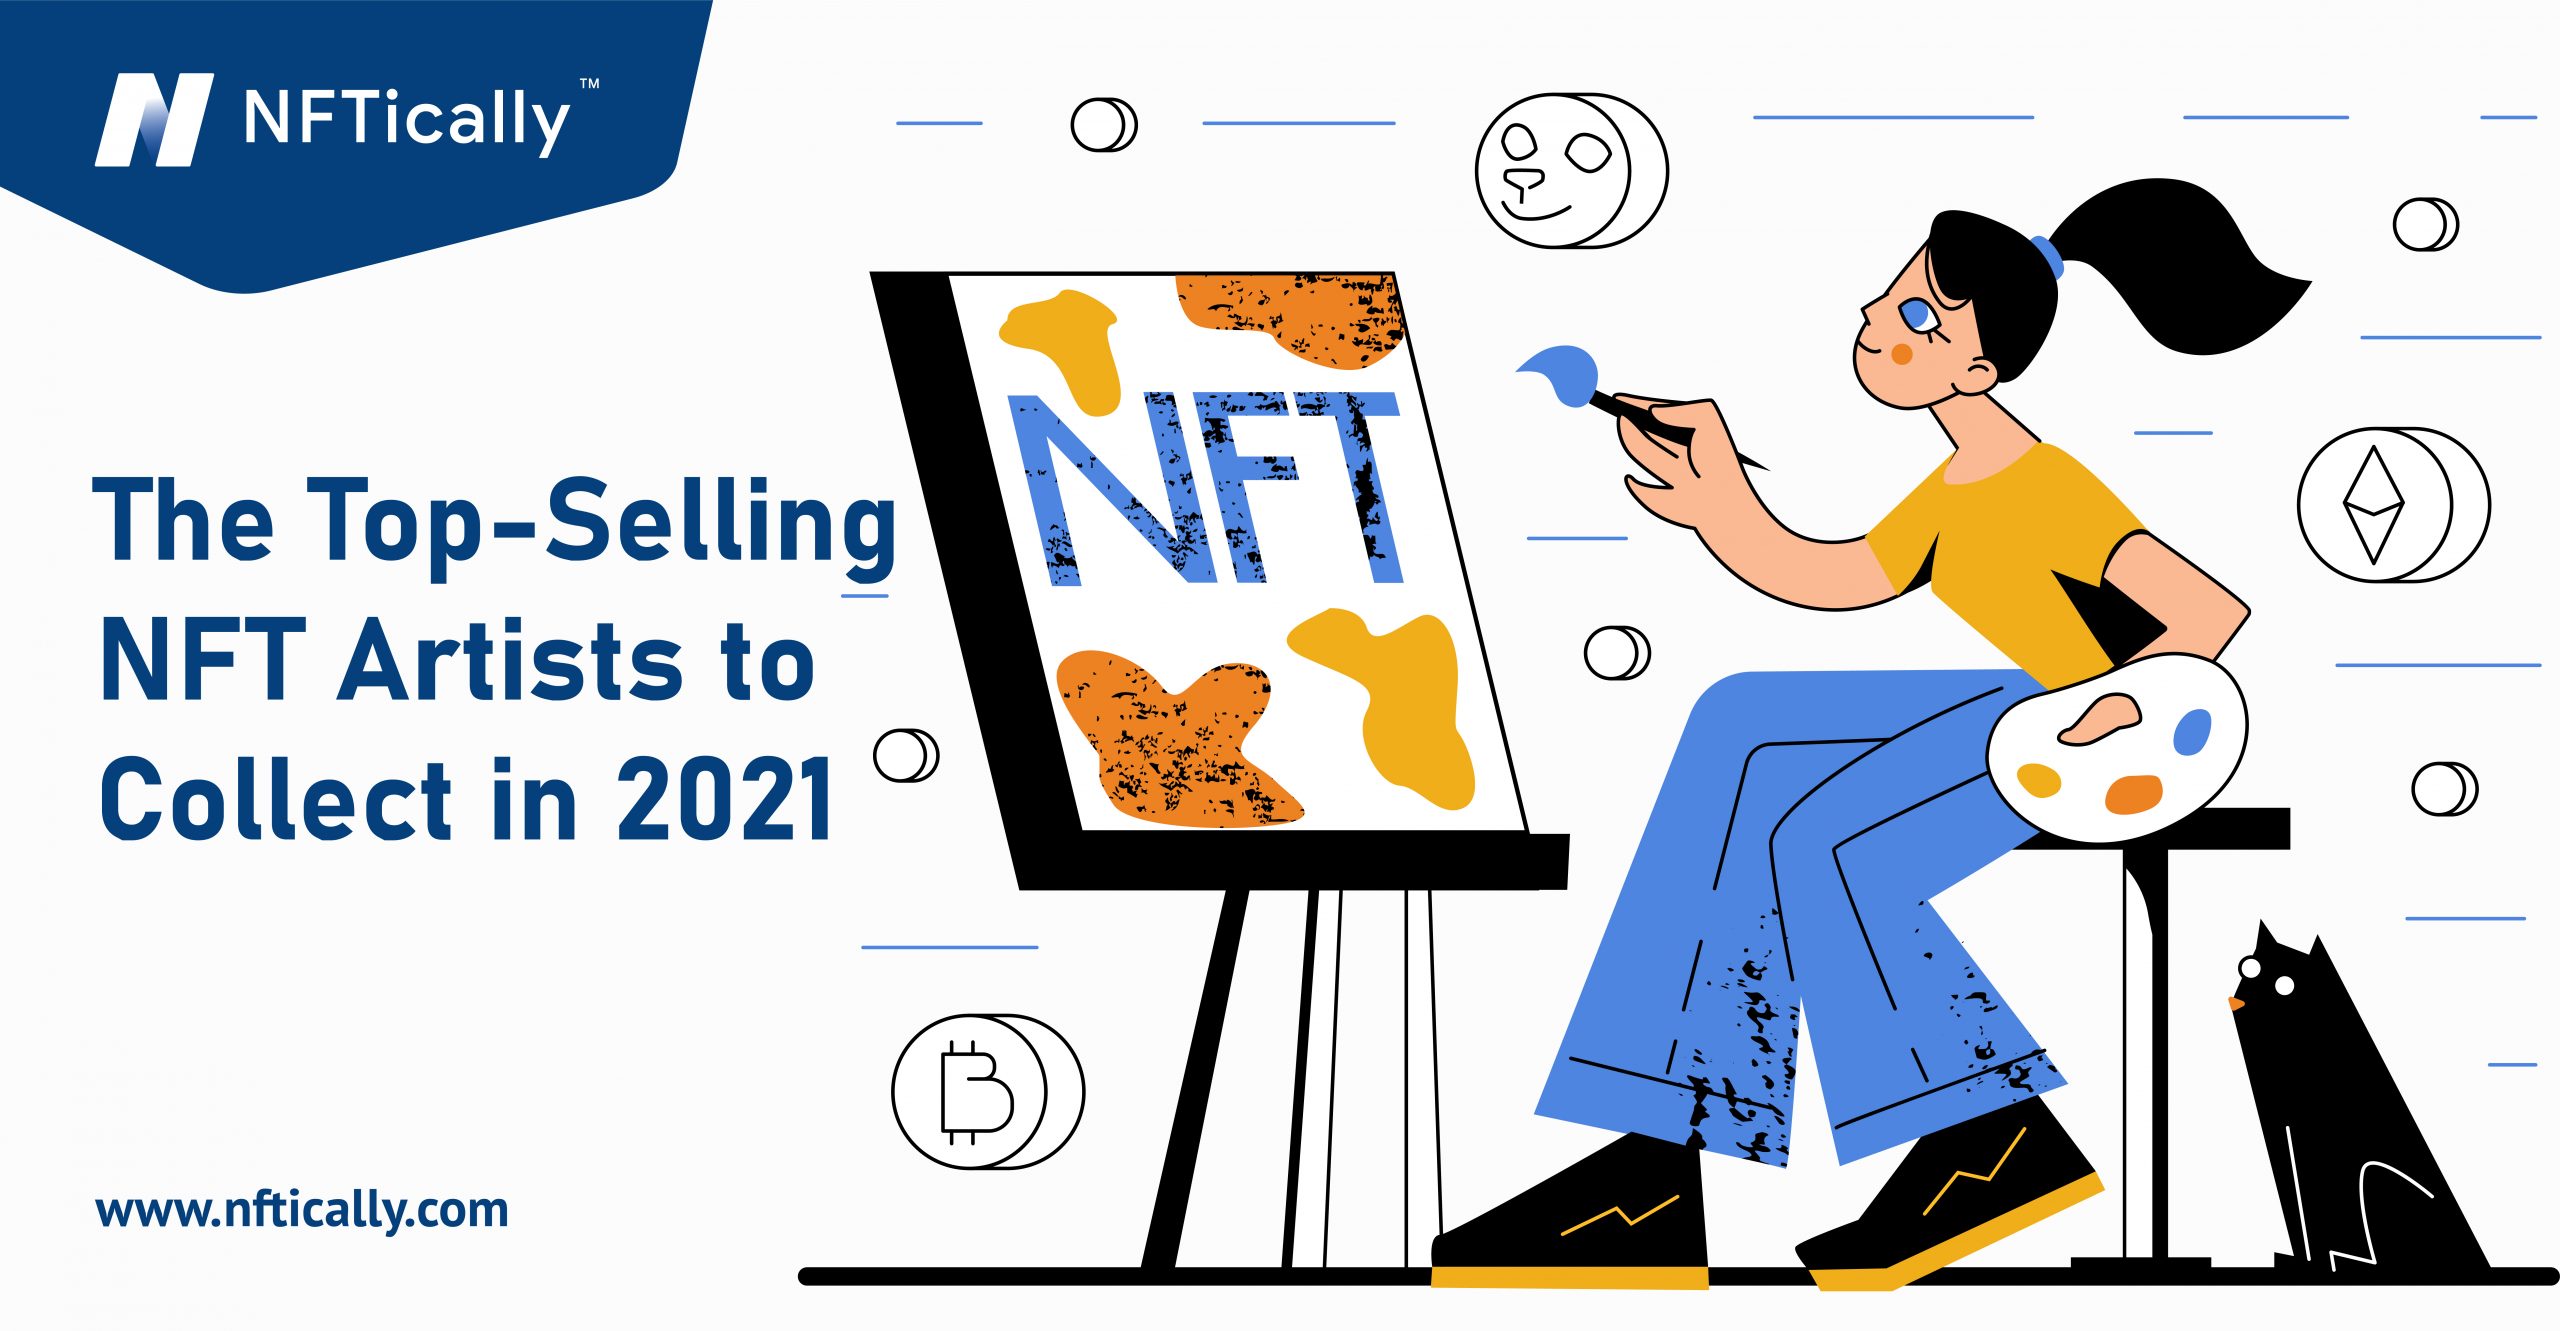 The Top-Selling NFT Artists to Collect in 2021